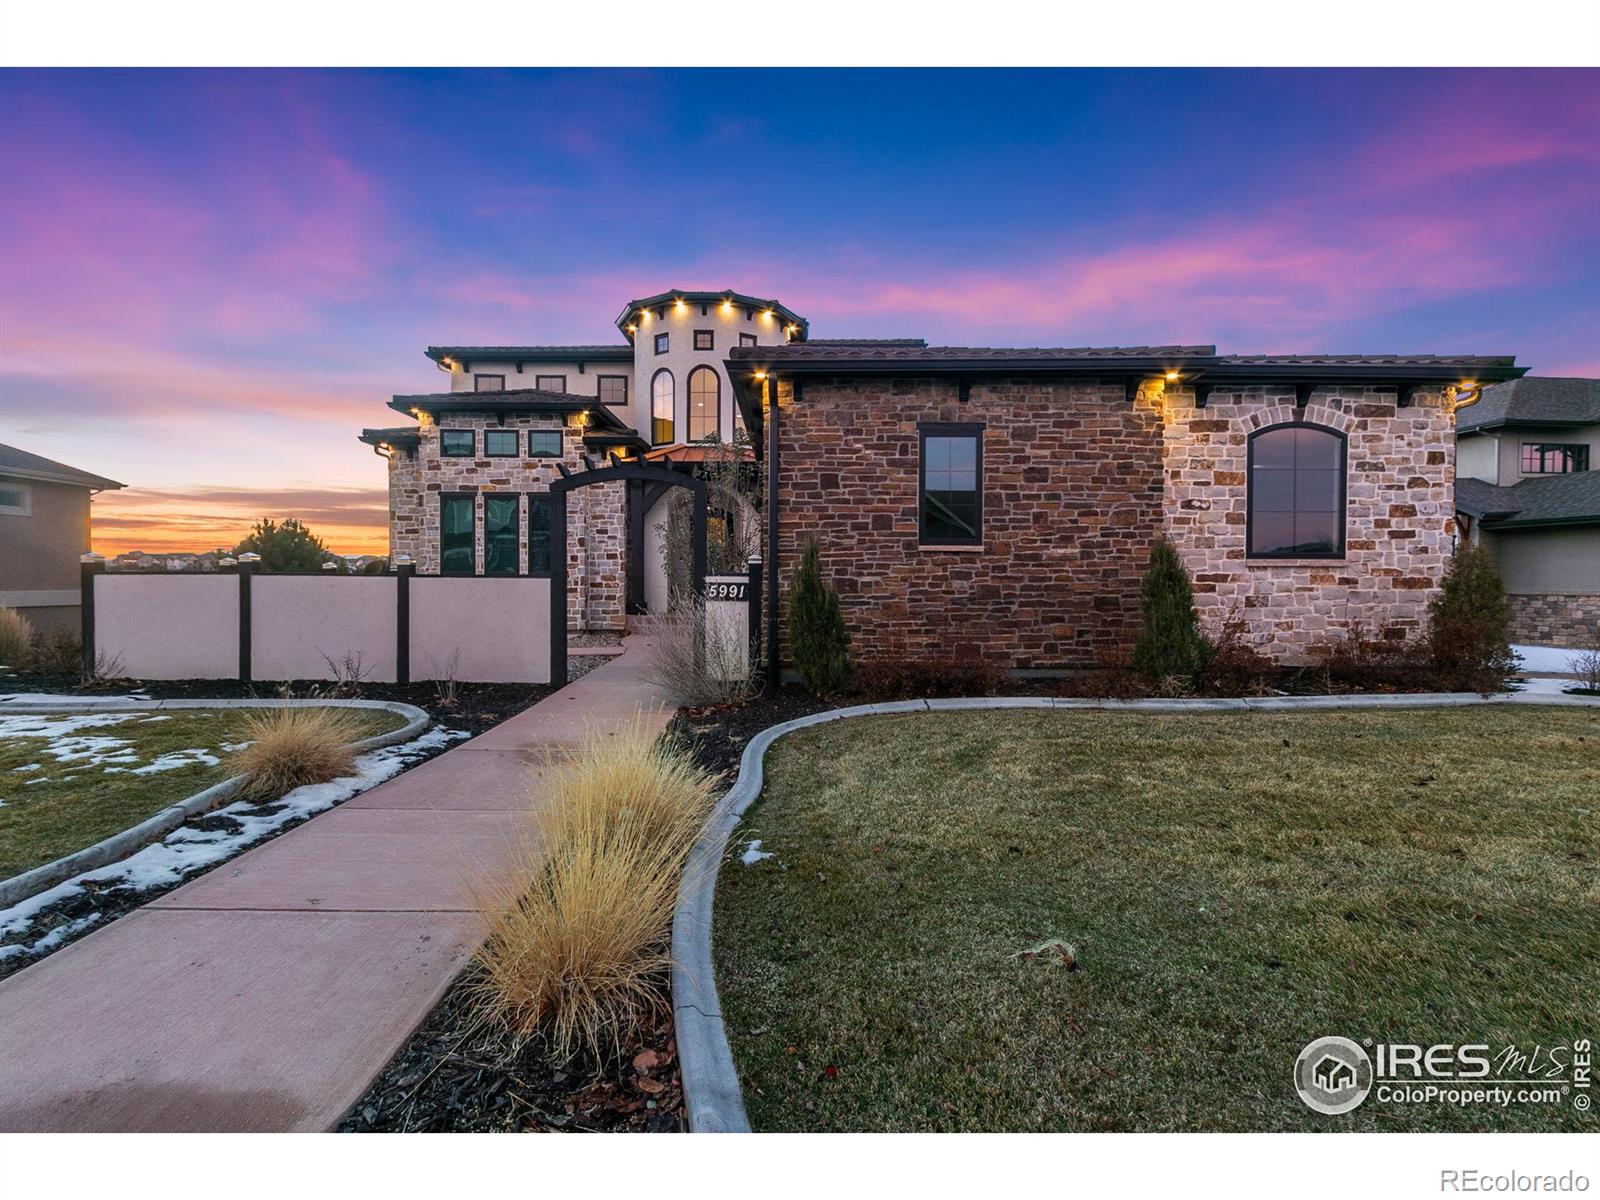 Report Image for 5991  Last Pointe Drive,Windsor, Colorado